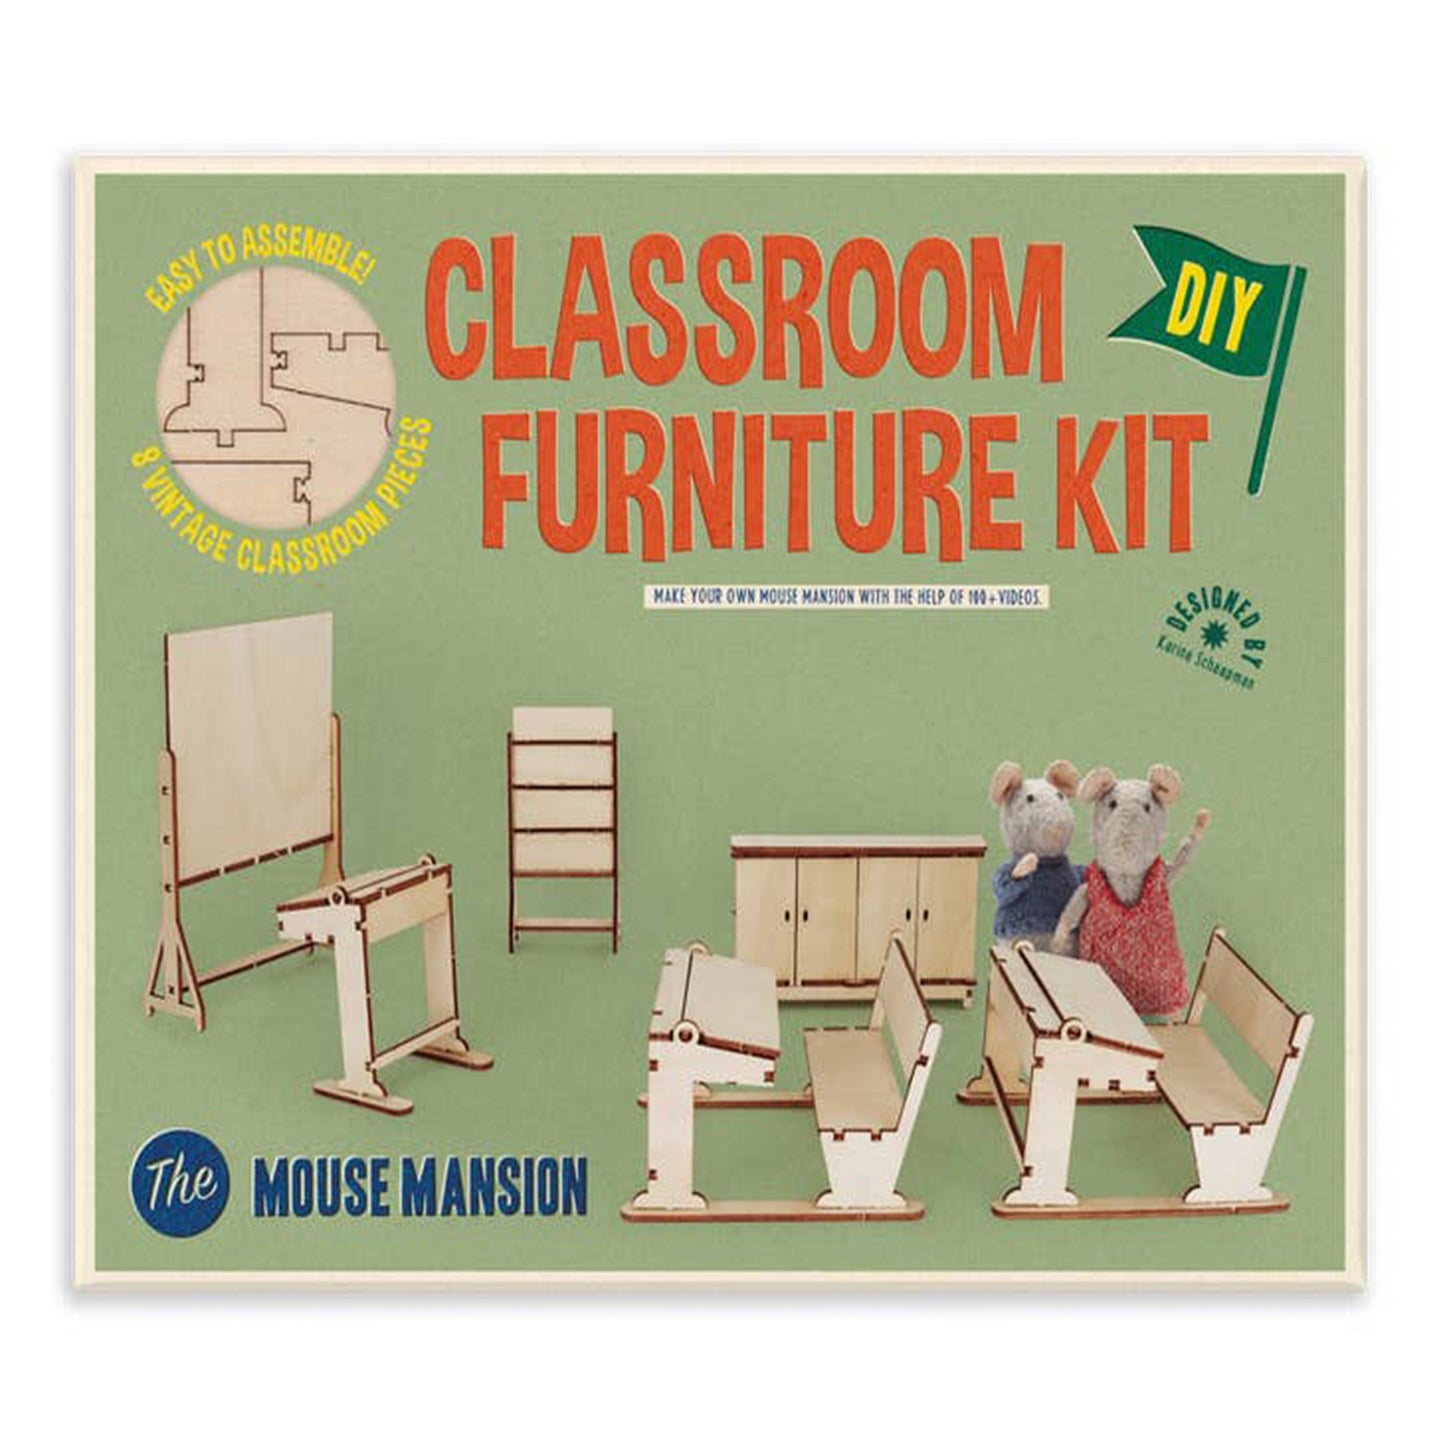 The Mouse Mansion Furniture Kit - Classroom - Het Muizenhuis - The Forgotten Toy Shop